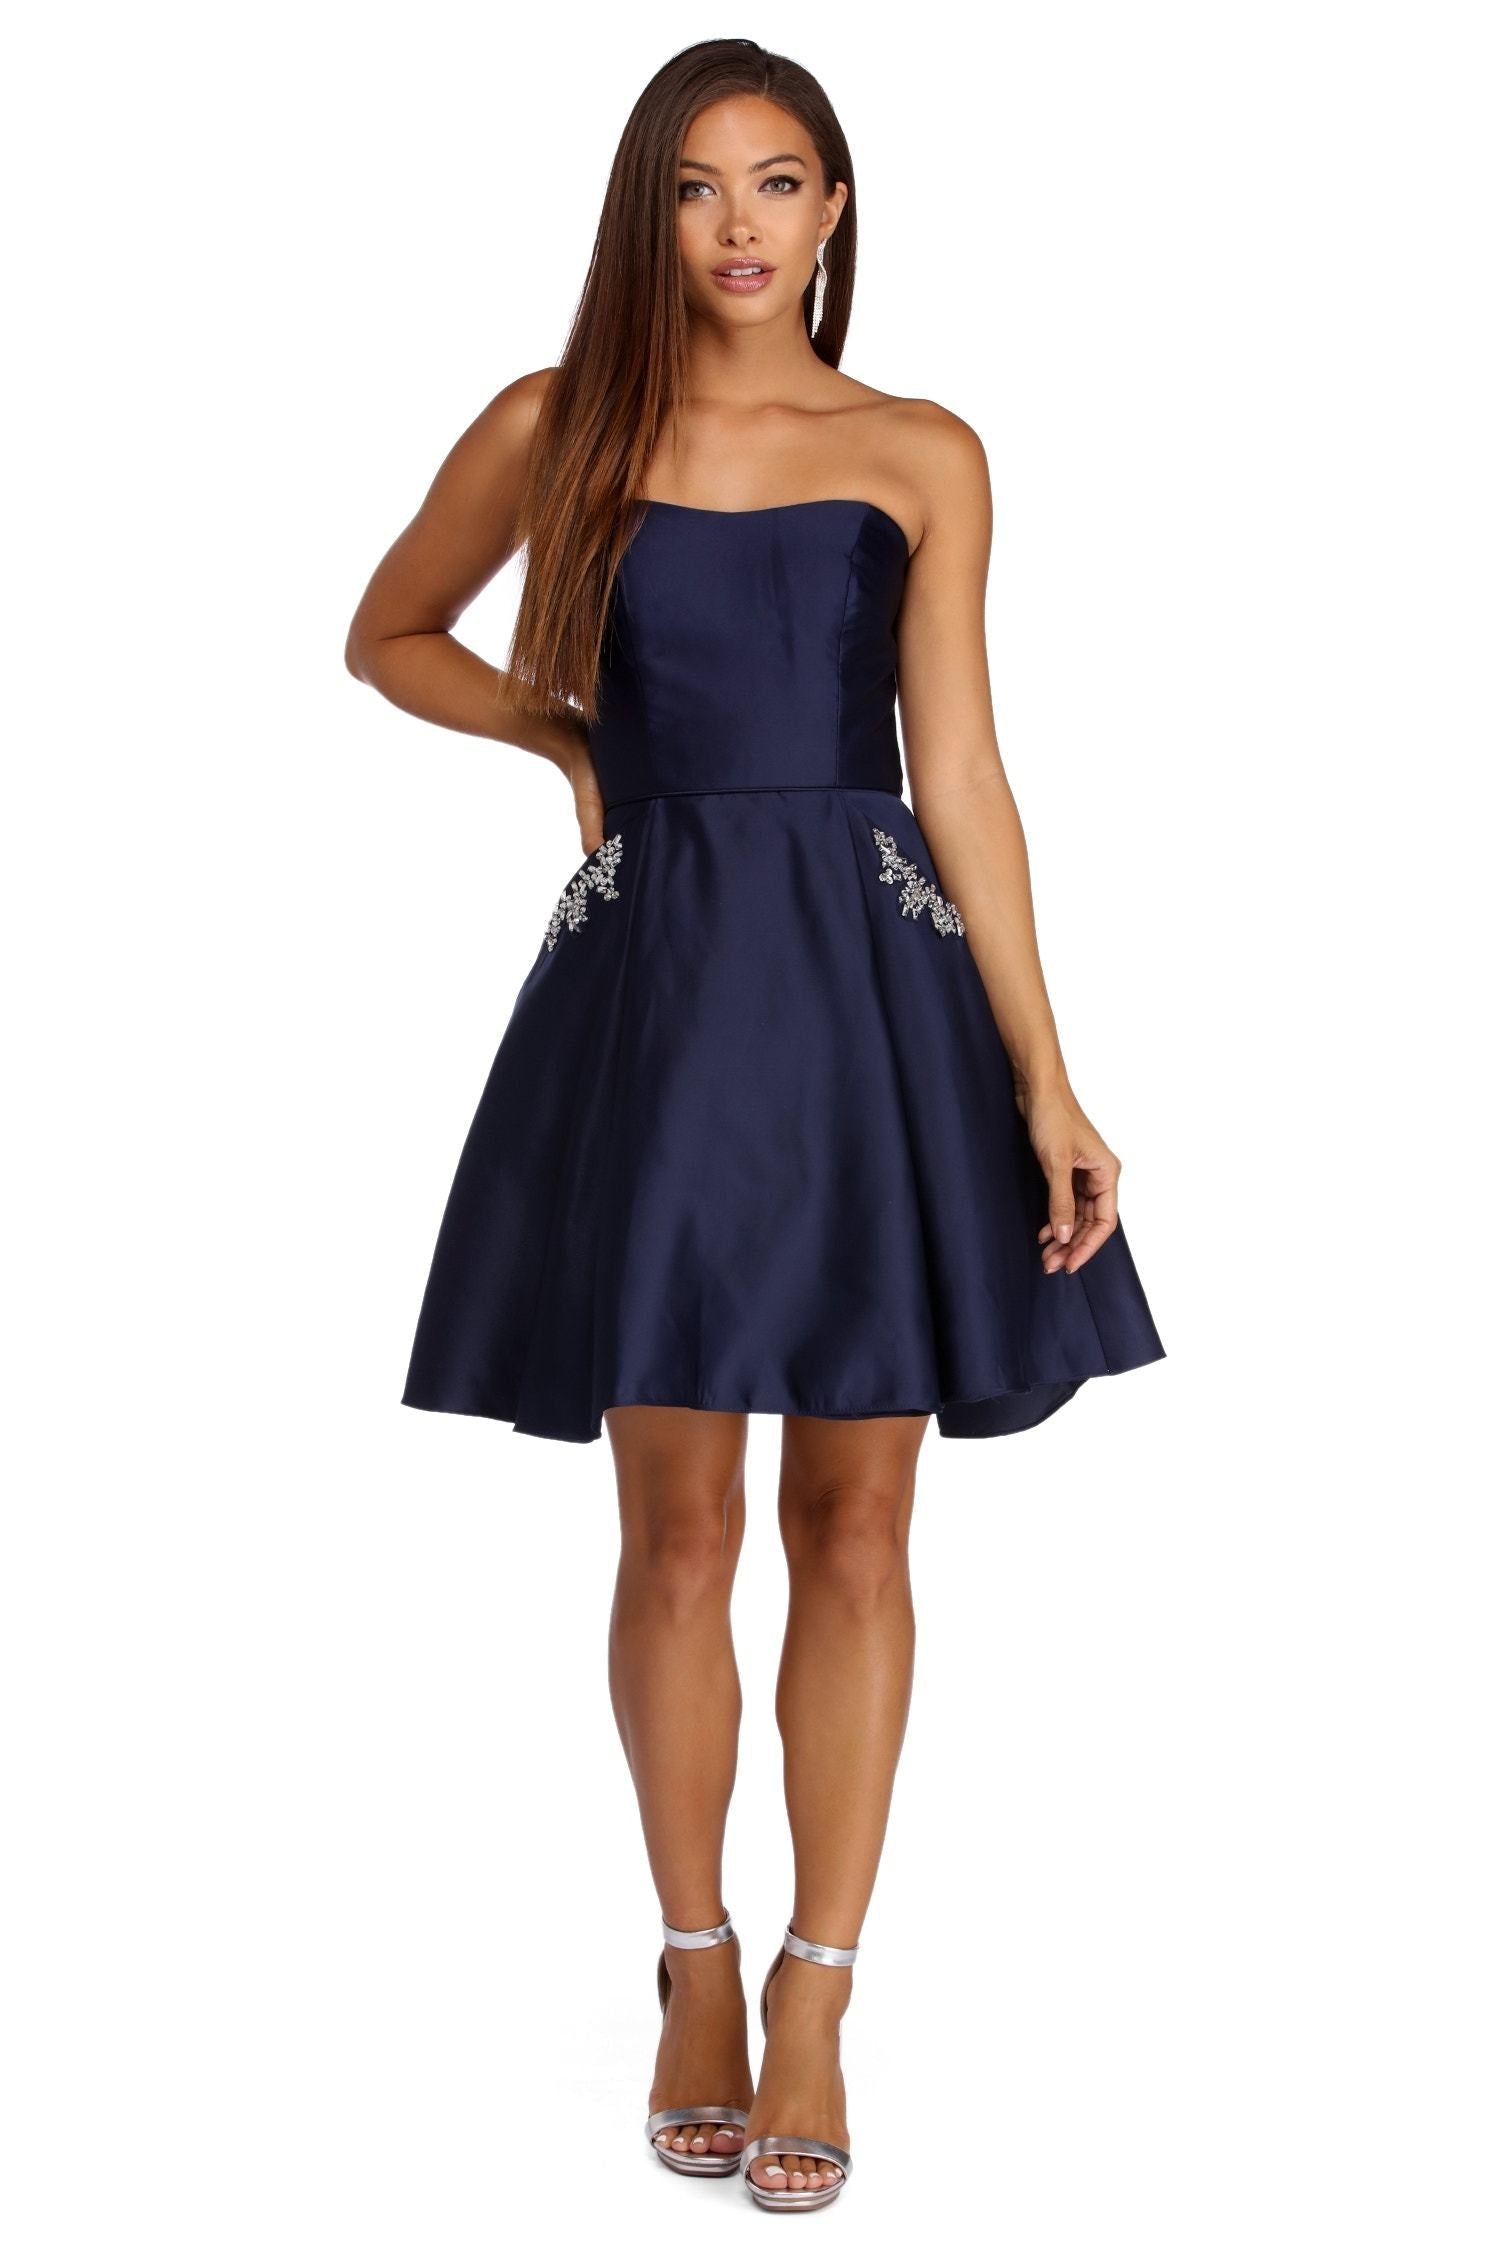 Noelle Formal Satin Party Dress - Lady Occasions